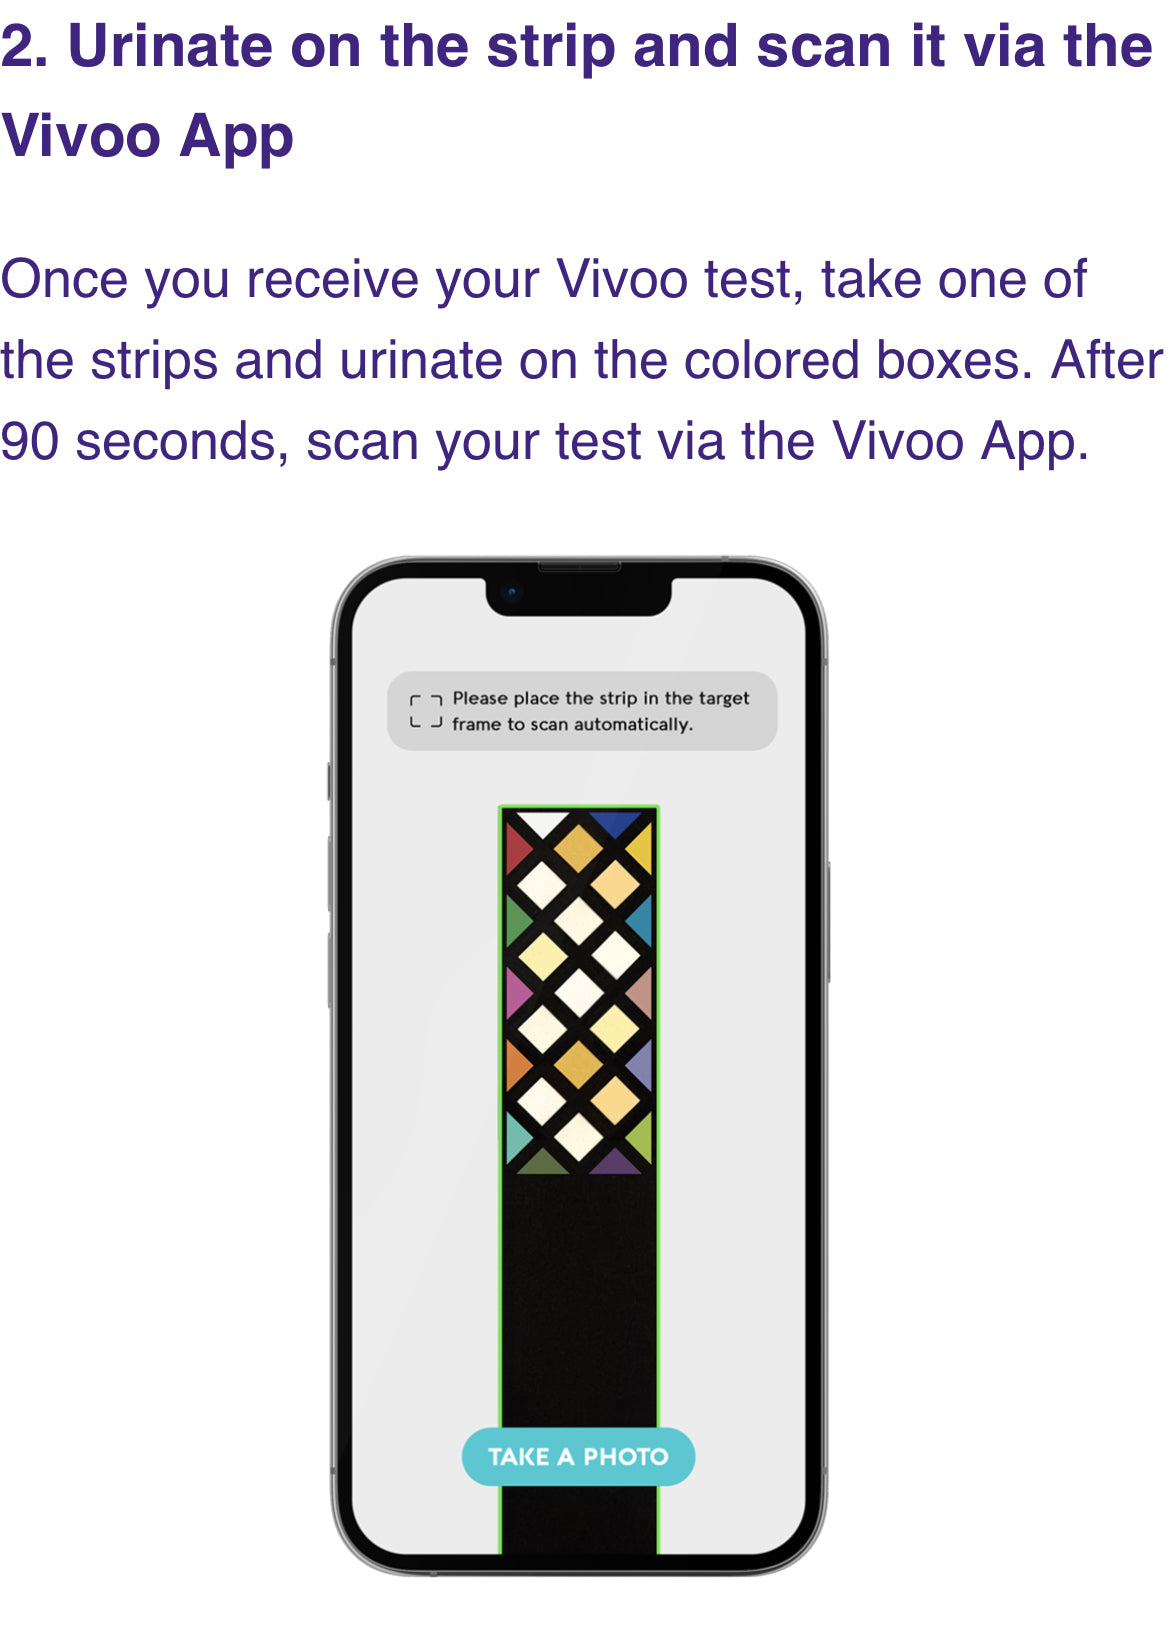 Full Body Analysis Test Vivoo Urine Tests - For Frequent Testing - Medaid - Lebanon